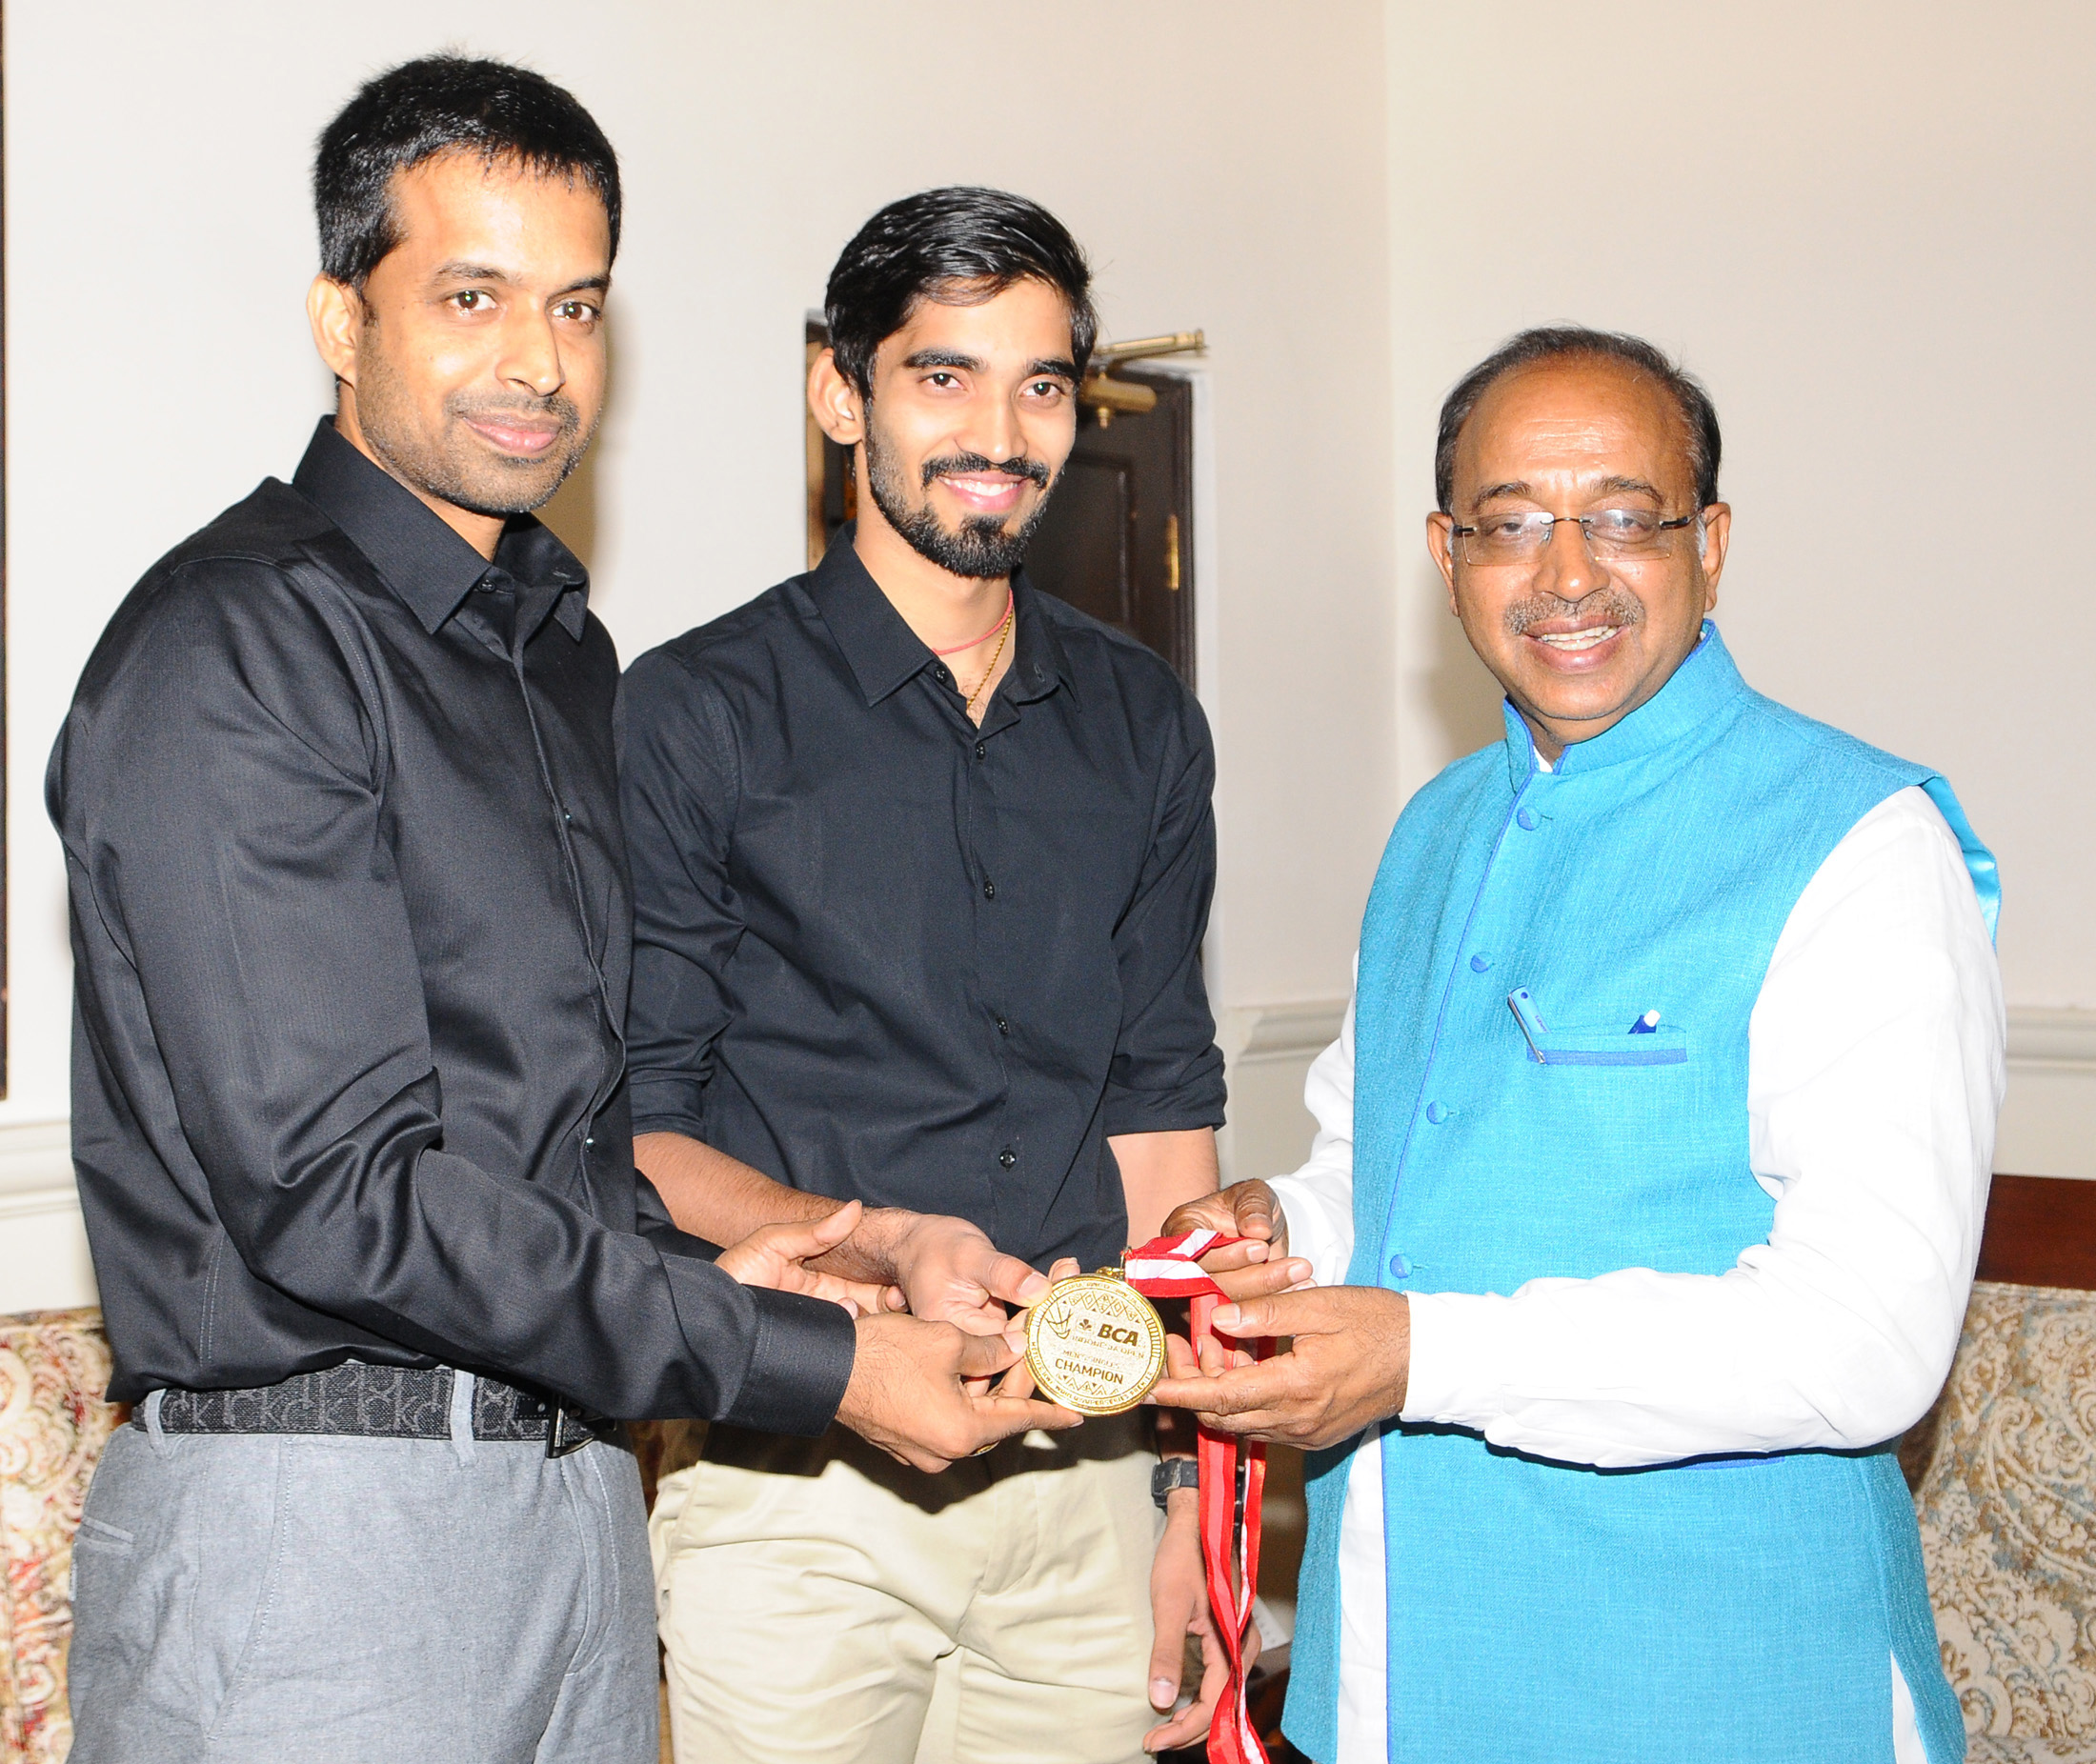 FileBadminton Player Srikanth Kidambi along with Pullela Gopichand calling on the Minister of State for Youth Affairs and Sports (IC), Water Resources, River Development and Ganga Rejuvenation, Shri Vijay Goel, in New